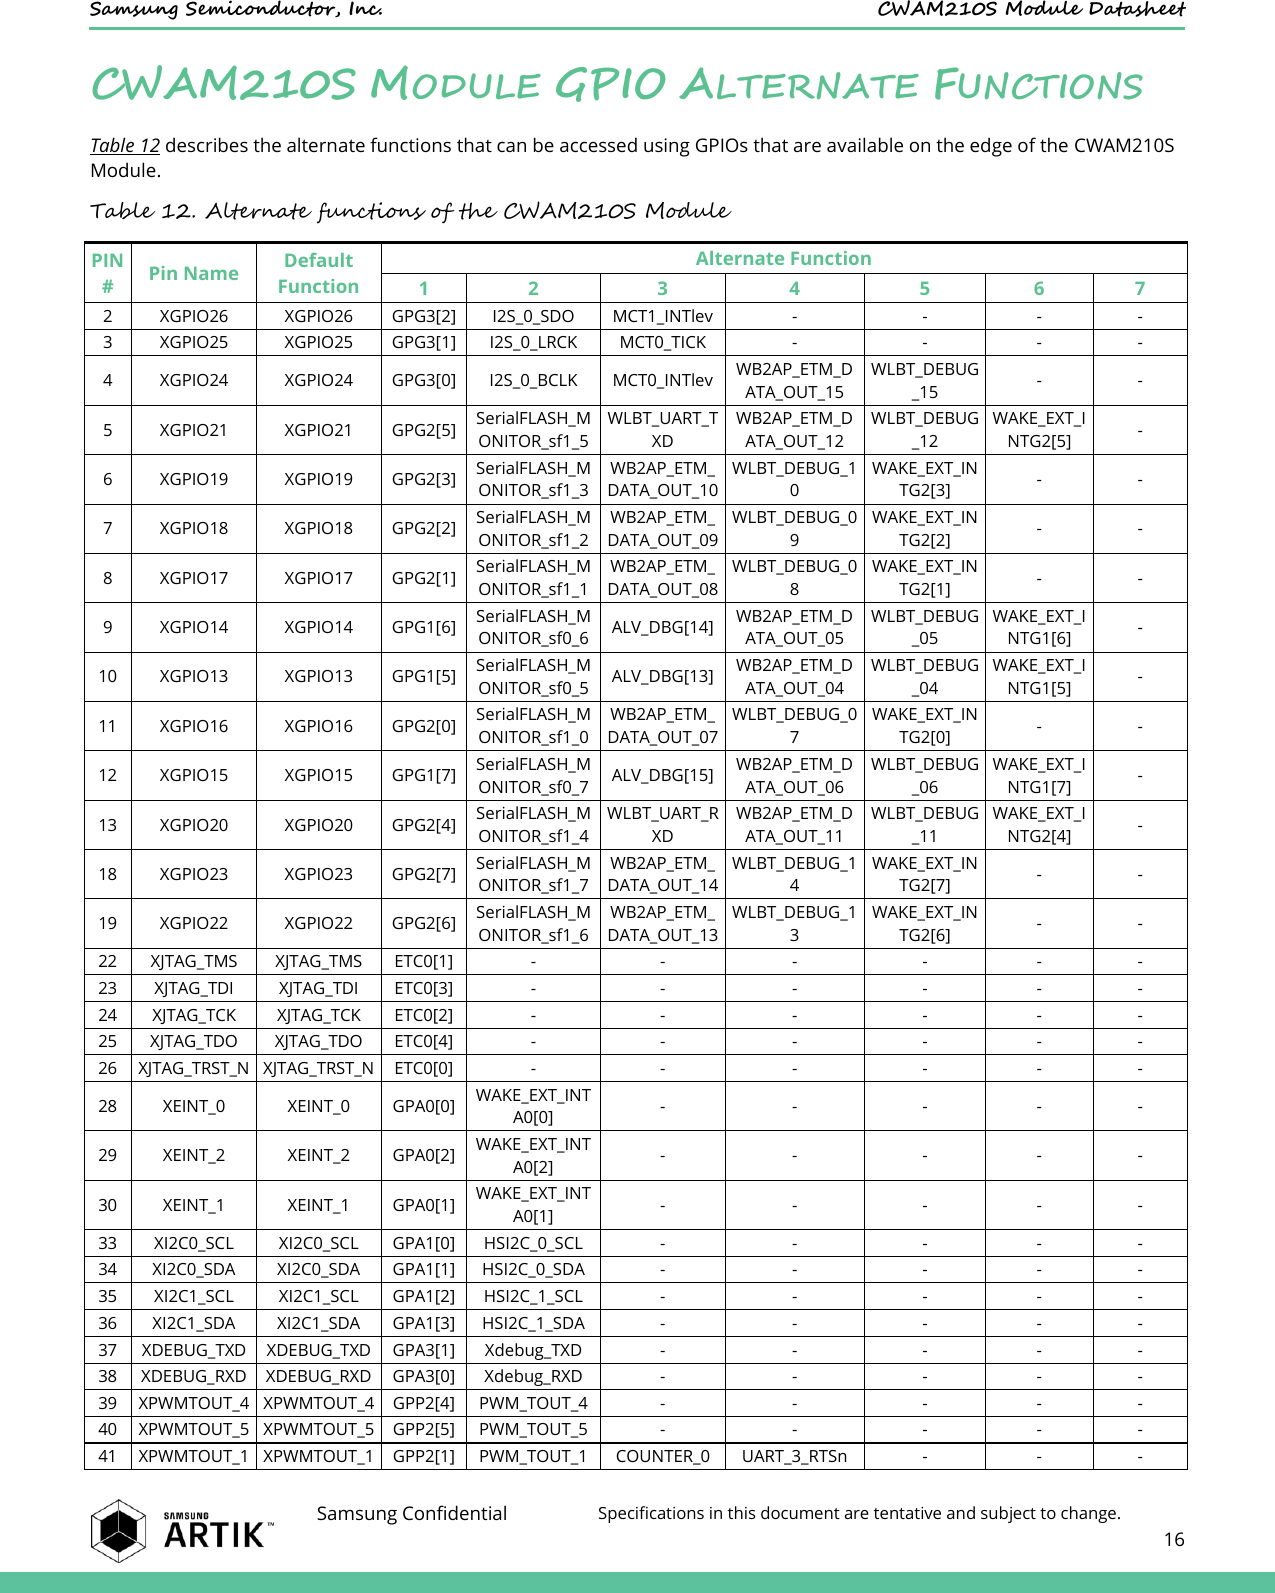    Samsung Semiconductor, Inc.  CWAM210S Module Datasheet    Samsung Confidential Specifications in this document are tentative and subject to change.  16  CWAM210S MODULE GPIO ALTERNATE FUNCTIONS Table 12 describes the alternate functions that can be accessed using GPIOs that are available on the edge of the CWAM210S Module. Table 12. Alternate functions of the CWAM210S Module PIN # Pin Name Default Function Alternate Function 1 2 3 4 5 6 7 2 XGPIO26 XGPIO26 GPG3[2] I2S_0_SDO MCT1_INTlev - - - - 3 XGPIO25 XGPIO25 GPG3[1] I2S_0_LRCK MCT0_TICK - - - - 4 XGPIO24 XGPIO24 GPG3[0] I2S_0_BCLK MCT0_INTlev WB2AP_ETM_DATA_OUT_15 WLBT_DEBUG_15 - - 5 XGPIO21 XGPIO21 GPG2[5] SerialFLASH_MONITOR_sf1_5 WLBT_UART_TXD WB2AP_ETM_DATA_OUT_12 WLBT_DEBUG_12 WAKE_EXT_INTG2[5] - 6 XGPIO19 XGPIO19 GPG2[3] SerialFLASH_MONITOR_sf1_3 WB2AP_ETM_DATA_OUT_10 WLBT_DEBUG_10 WAKE_EXT_INTG2[3] - - 7 XGPIO18 XGPIO18 GPG2[2] SerialFLASH_MONITOR_sf1_2 WB2AP_ETM_DATA_OUT_09 WLBT_DEBUG_09 WAKE_EXT_INTG2[2] - - 8 XGPIO17 XGPIO17 GPG2[1] SerialFLASH_MONITOR_sf1_1 WB2AP_ETM_DATA_OUT_08 WLBT_DEBUG_08 WAKE_EXT_INTG2[1] - - 9 XGPIO14 XGPIO14 GPG1[6] SerialFLASH_MONITOR_sf0_6 ALV_DBG[14] WB2AP_ETM_DATA_OUT_05 WLBT_DEBUG_05 WAKE_EXT_INTG1[6] - 10 XGPIO13 XGPIO13 GPG1[5] SerialFLASH_MONITOR_sf0_5 ALV_DBG[13] WB2AP_ETM_DATA_OUT_04 WLBT_DEBUG_04 WAKE_EXT_INTG1[5] - 11 XGPIO16 XGPIO16 GPG2[0] SerialFLASH_MONITOR_sf1_0 WB2AP_ETM_DATA_OUT_07 WLBT_DEBUG_07 WAKE_EXT_INTG2[0] - - 12 XGPIO15 XGPIO15 GPG1[7] SerialFLASH_MONITOR_sf0_7 ALV_DBG[15] WB2AP_ETM_DATA_OUT_06 WLBT_DEBUG_06 WAKE_EXT_INTG1[7] - 13 XGPIO20 XGPIO20 GPG2[4] SerialFLASH_MONITOR_sf1_4 WLBT_UART_RXD WB2AP_ETM_DATA_OUT_11 WLBT_DEBUG_11 WAKE_EXT_INTG2[4] - 18 XGPIO23 XGPIO23 GPG2[7] SerialFLASH_MONITOR_sf1_7 WB2AP_ETM_DATA_OUT_14 WLBT_DEBUG_14 WAKE_EXT_INTG2[7] - - 19 XGPIO22 XGPIO22 GPG2[6] SerialFLASH_MONITOR_sf1_6 WB2AP_ETM_DATA_OUT_13 WLBT_DEBUG_13 WAKE_EXT_INTG2[6] - - 22 XJTAG_TMS XJTAG_TMS ETC0[1] - - - - - - 23 XJTAG_TDI XJTAG_TDI ETC0[3] - - - - - - 24 XJTAG_TCK XJTAG_TCK ETC0[2] - - - - - - 25 XJTAG_TDO XJTAG_TDO ETC0[4] - - - - - - 26 XJTAG_TRST_N XJTAG_TRST_N ETC0[0] - - - - - - 28 XEINT_0 XEINT_0 GPA0[0] WAKE_EXT_INTA0[0] - - - - - 29 XEINT_2 XEINT_2 GPA0[2] WAKE_EXT_INTA0[2] - - - - - 30 XEINT_1 XEINT_1 GPA0[1] WAKE_EXT_INTA0[1] - - - - - 33 XI2C0_SCL XI2C0_SCL GPA1[0] HSI2C_0_SCL - - - - - 34 XI2C0_SDA XI2C0_SDA GPA1[1] HSI2C_0_SDA - - - - - 35 XI2C1_SCL XI2C1_SCL GPA1[2] HSI2C_1_SCL - - - - - 36 XI2C1_SDA XI2C1_SDA GPA1[3] HSI2C_1_SDA - - - - - 37 XDEBUG_TXD XDEBUG_TXD GPA3[1] Xdebug_TXD - - - - - 38 XDEBUG_RXD XDEBUG_RXD GPA3[0] Xdebug_RXD - - - - - 39 XPWMTOUT_4 XPWMTOUT_4 GPP2[4] PWM_TOUT_4 - - - - - 40 XPWMTOUT_5 XPWMTOUT_5 GPP2[5] PWM_TOUT_5 - - - - - 41 XPWMTOUT_1 XPWMTOUT_1 GPP2[1] PWM_TOUT_1 COUNTER_0 UART_3_RTSn - - - 